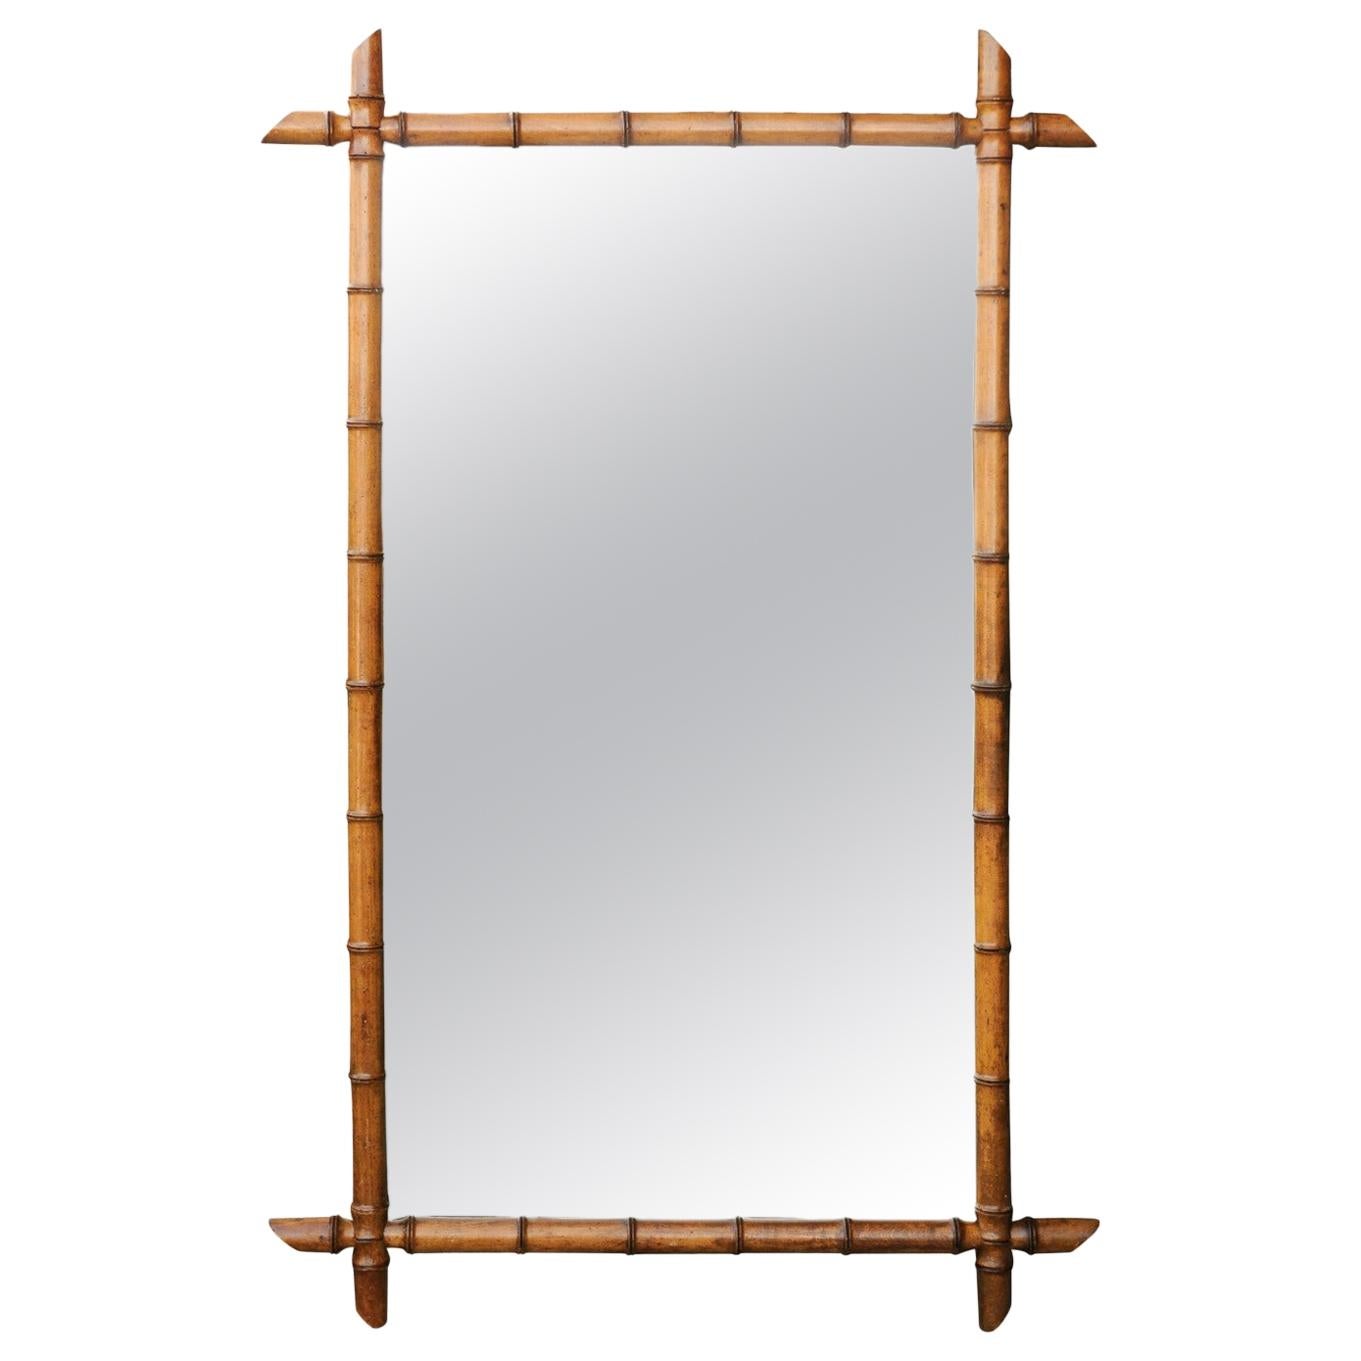 Turn of the Century French 1900s Faux Bamboo Mirror with Protruding Corners